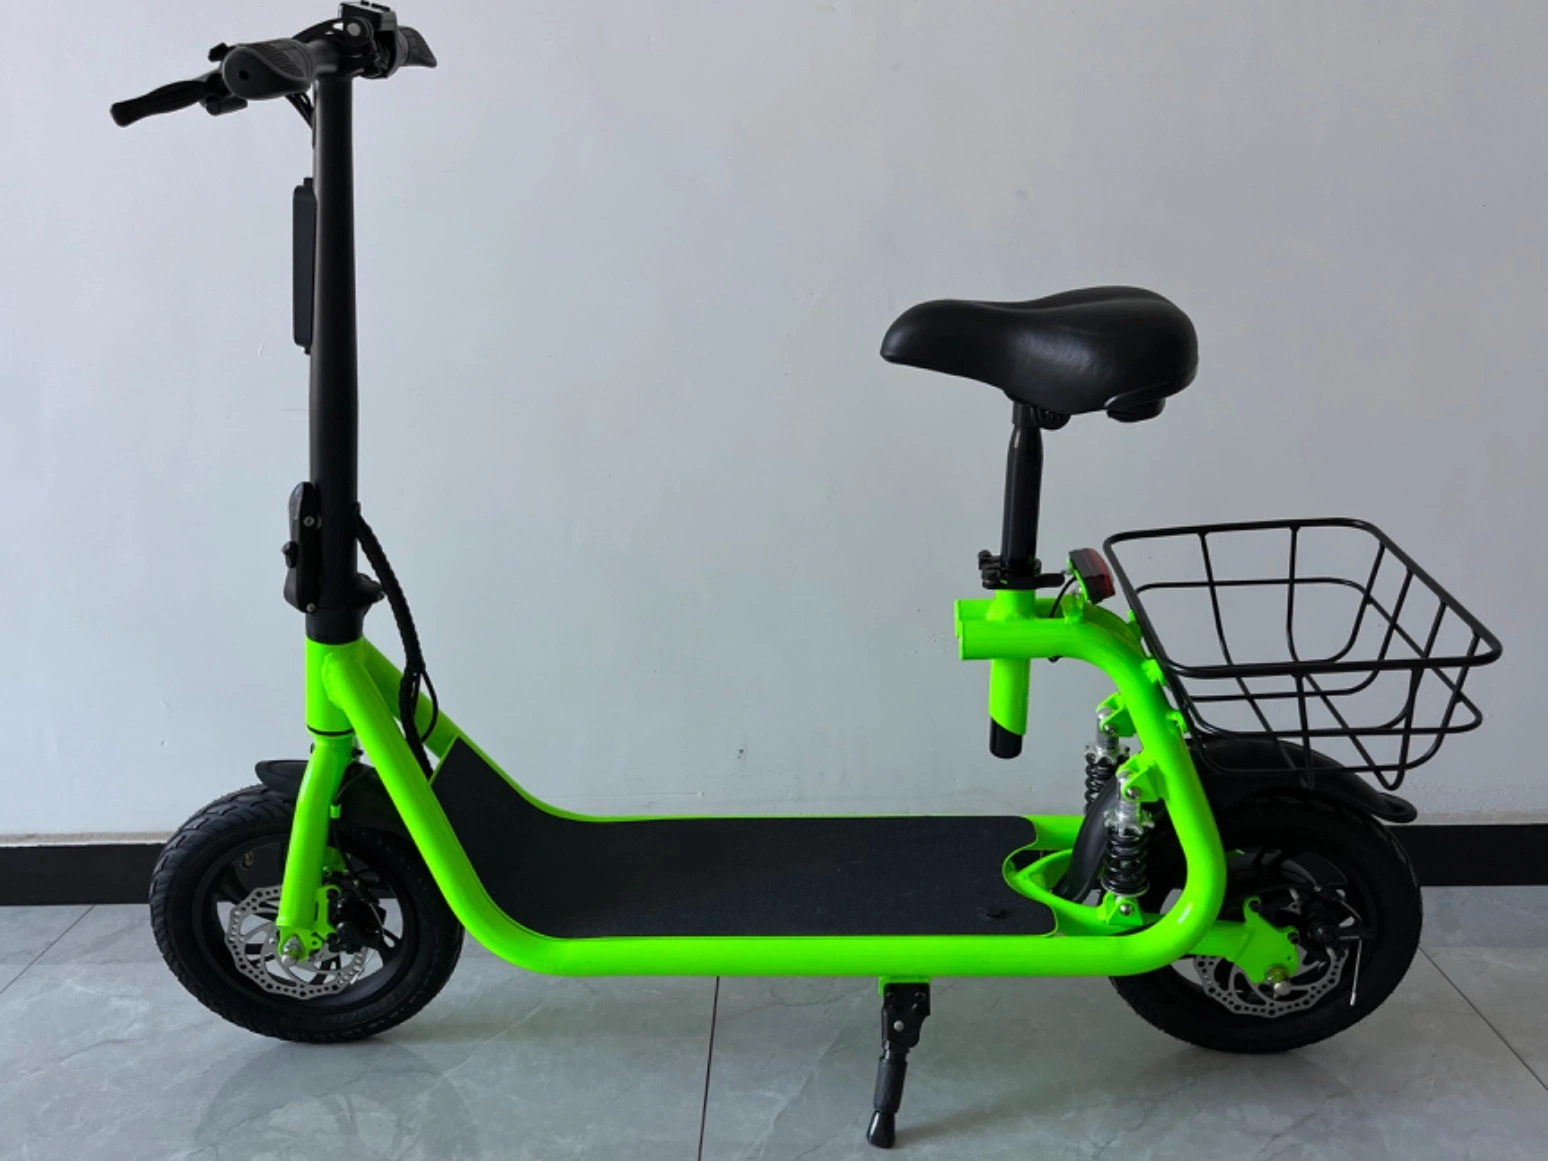 Eco-Friendly Aluminum Frame Cheap Mini City Bike Moped Three Speed Modes 25km/H Maxspeed Electric Scooter for Commuting